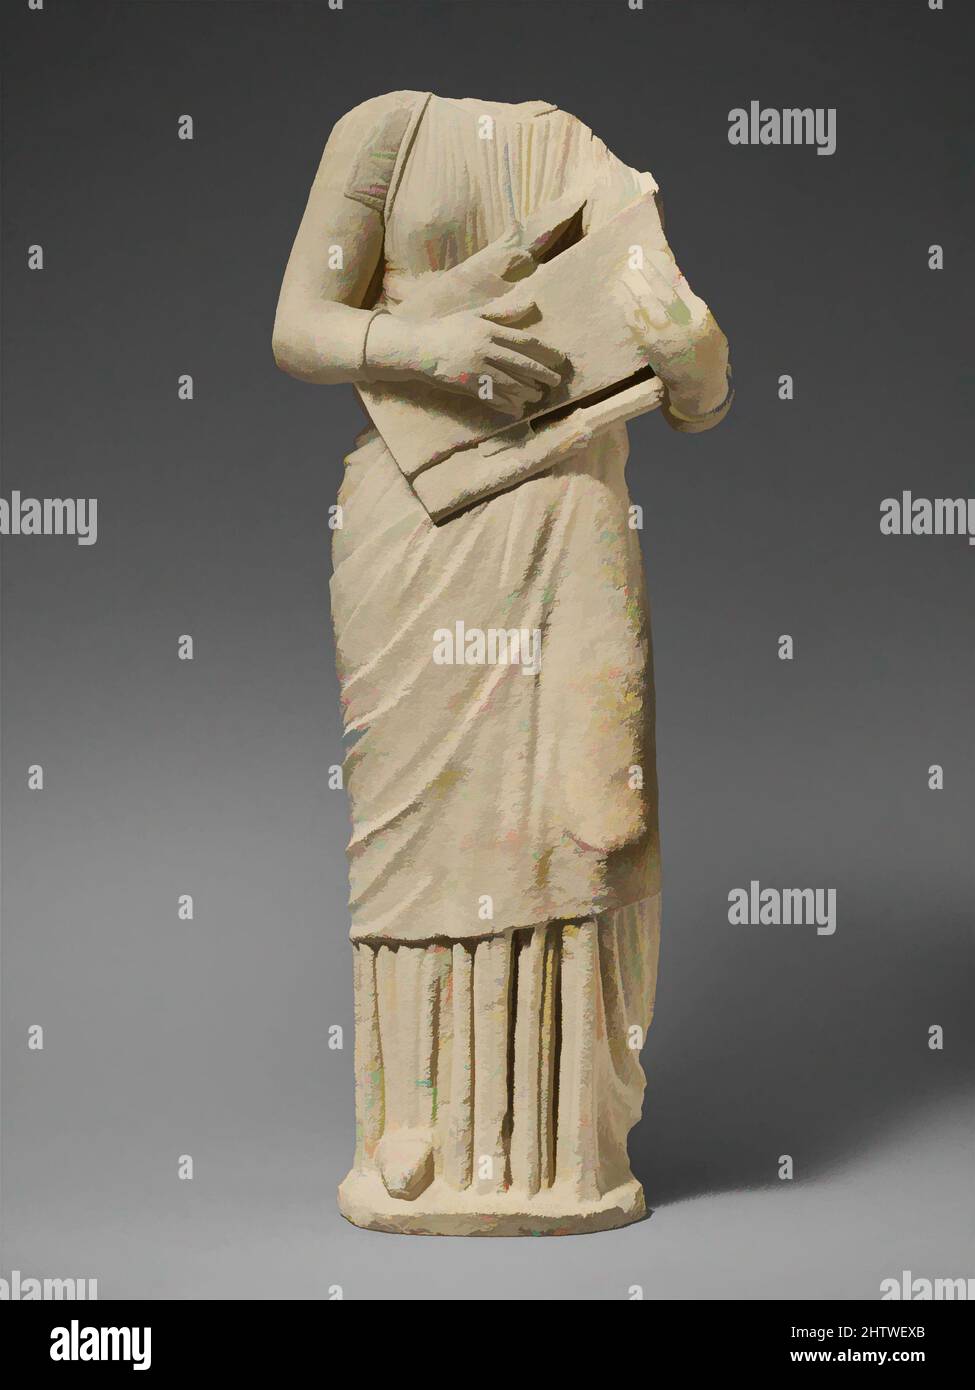 Art inspired by Limestone statue of a female lyre player, Hellenistic, Cypriot, Limestone, Overall: 34 3/4 x 13 3/4 x 7 3/8 in. (88.3 x 34.9 x 18.7 cm), Stone Sculpture, This work is distinguished by its size and the quality of execution, Classic works modernized by Artotop with a splash of modernity. Shapes, color and value, eye-catching visual impact on art. Emotions through freedom of artworks in a contemporary way. A timeless message pursuing a wildly creative new direction. Artists turning to the digital medium and creating the Artotop NFT Stock Photo